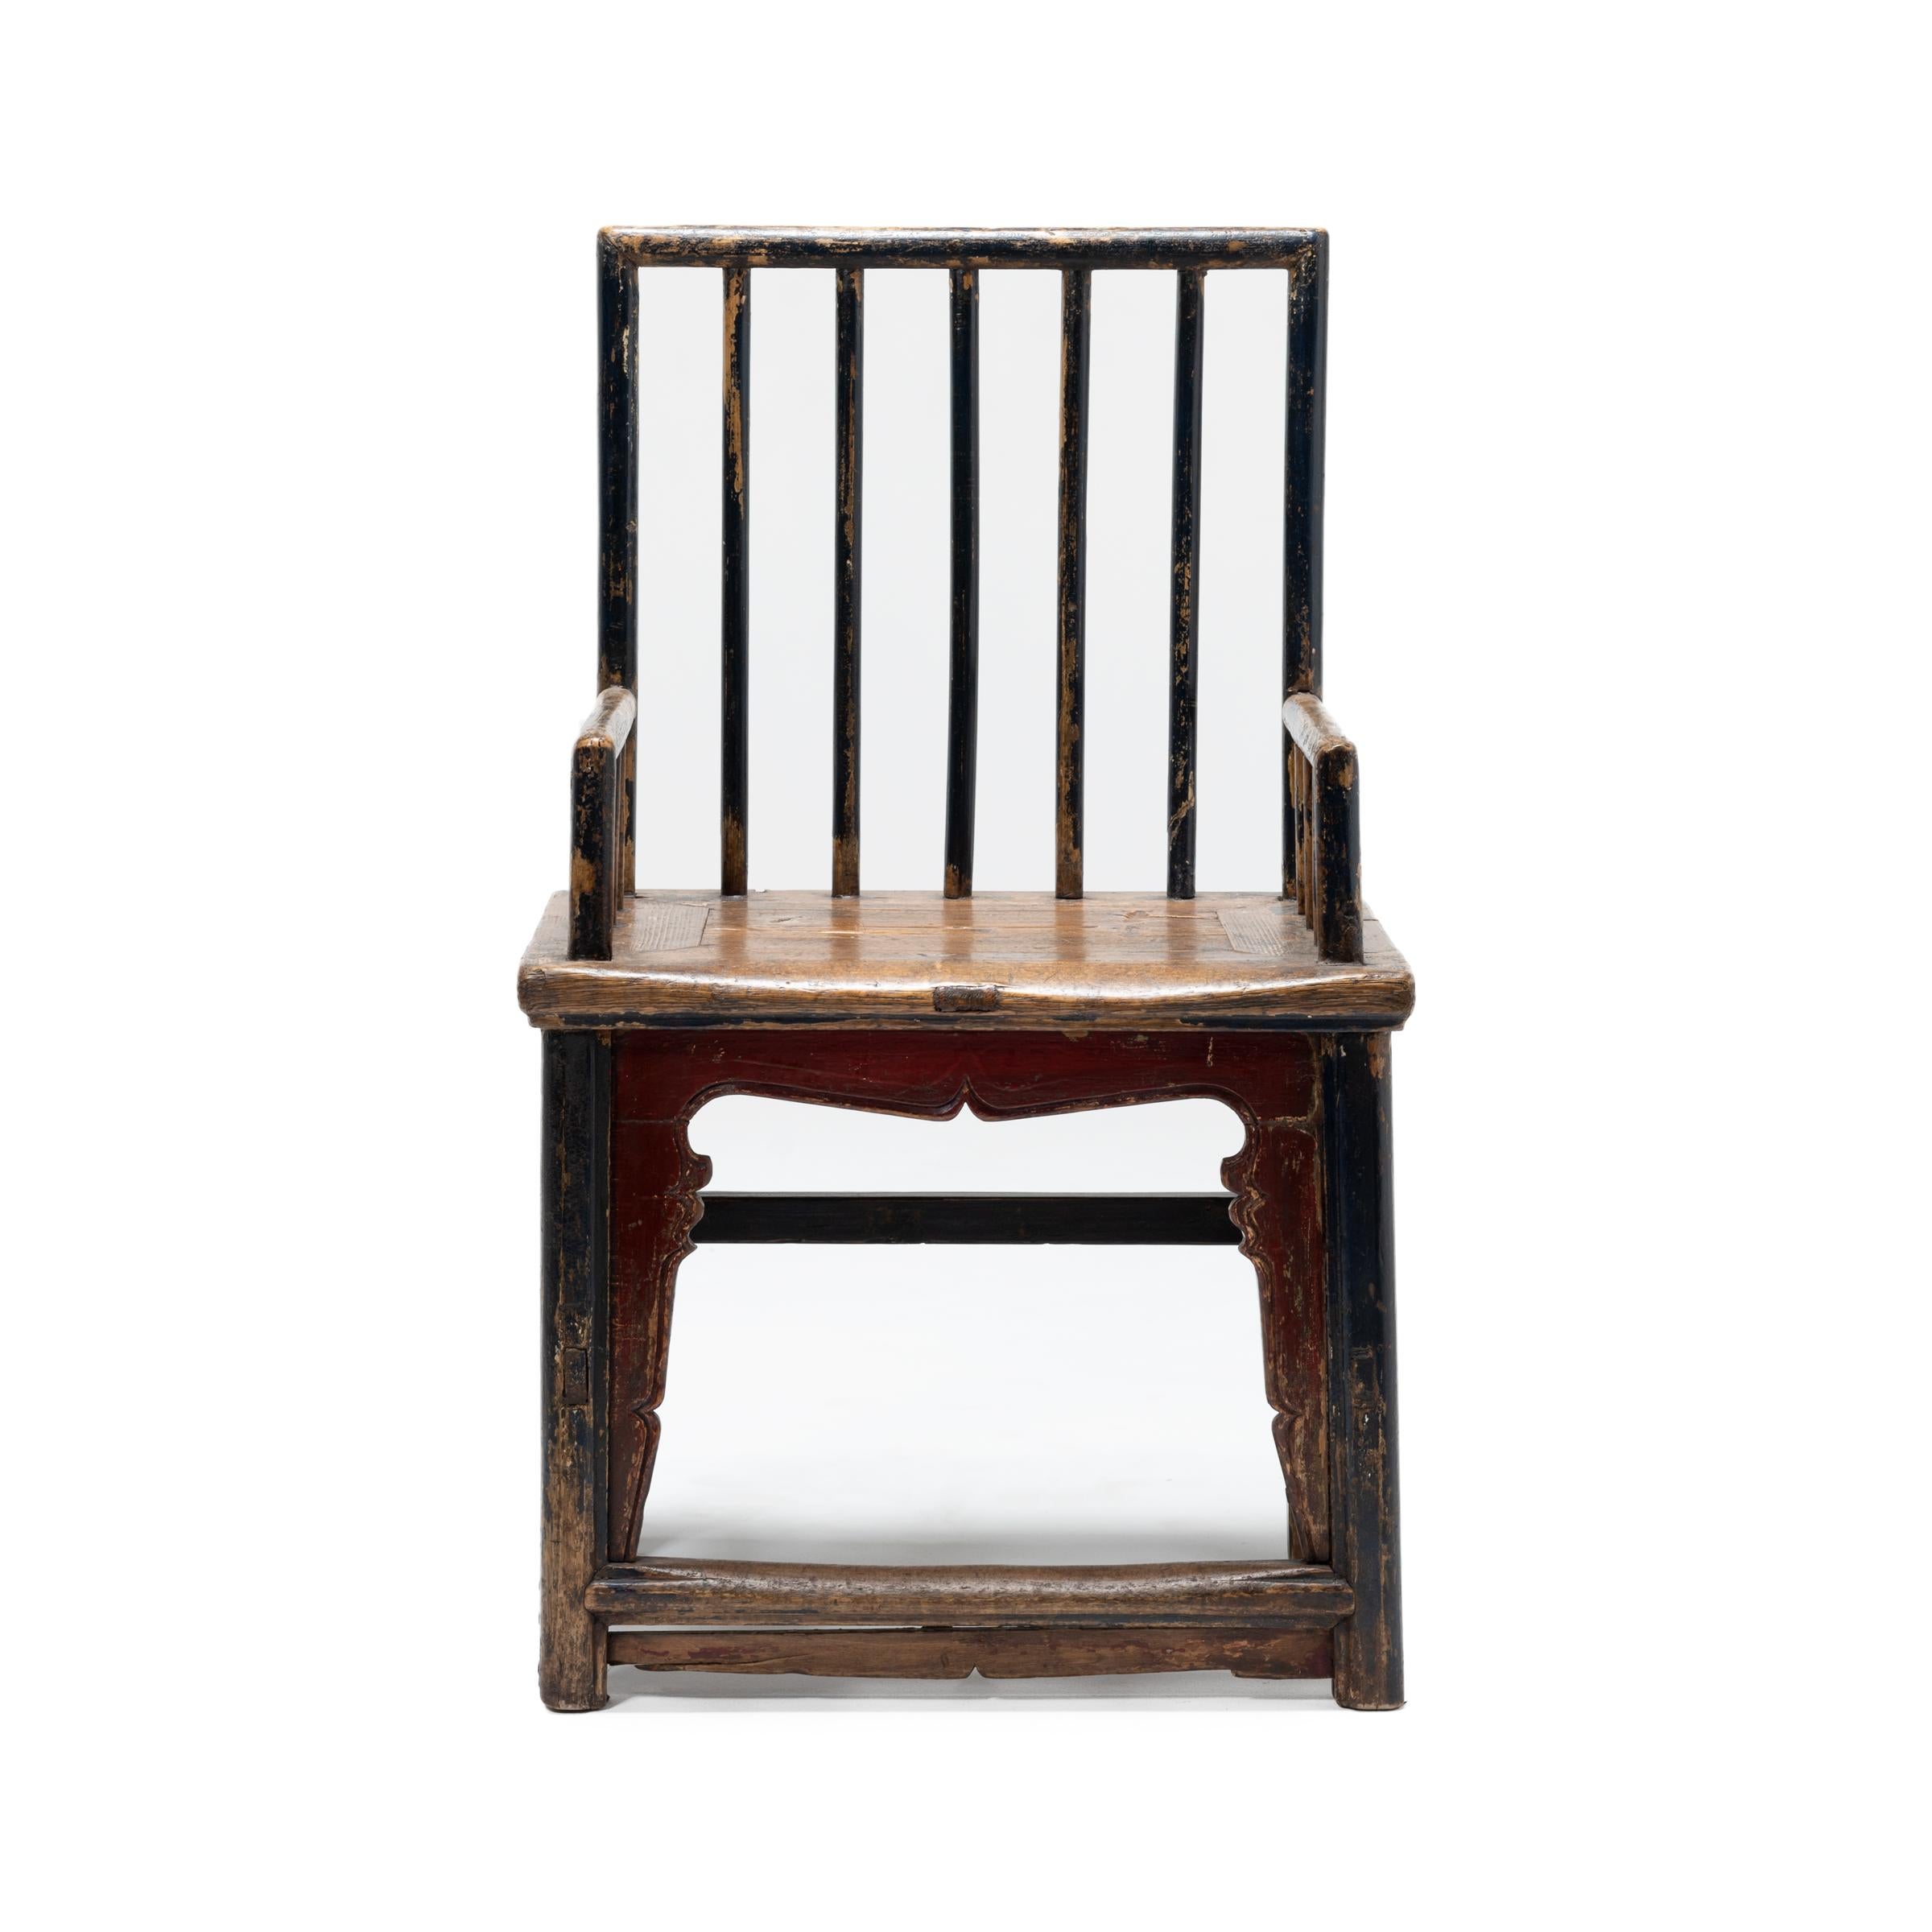 This curious 19th century spindleback chair defies traditional Qing-dynasty forms. A collection of moments from previous eras, the chair incorporates elements drawn from Chinese carpentry ideals spanning back as far as the 16th century. The clean